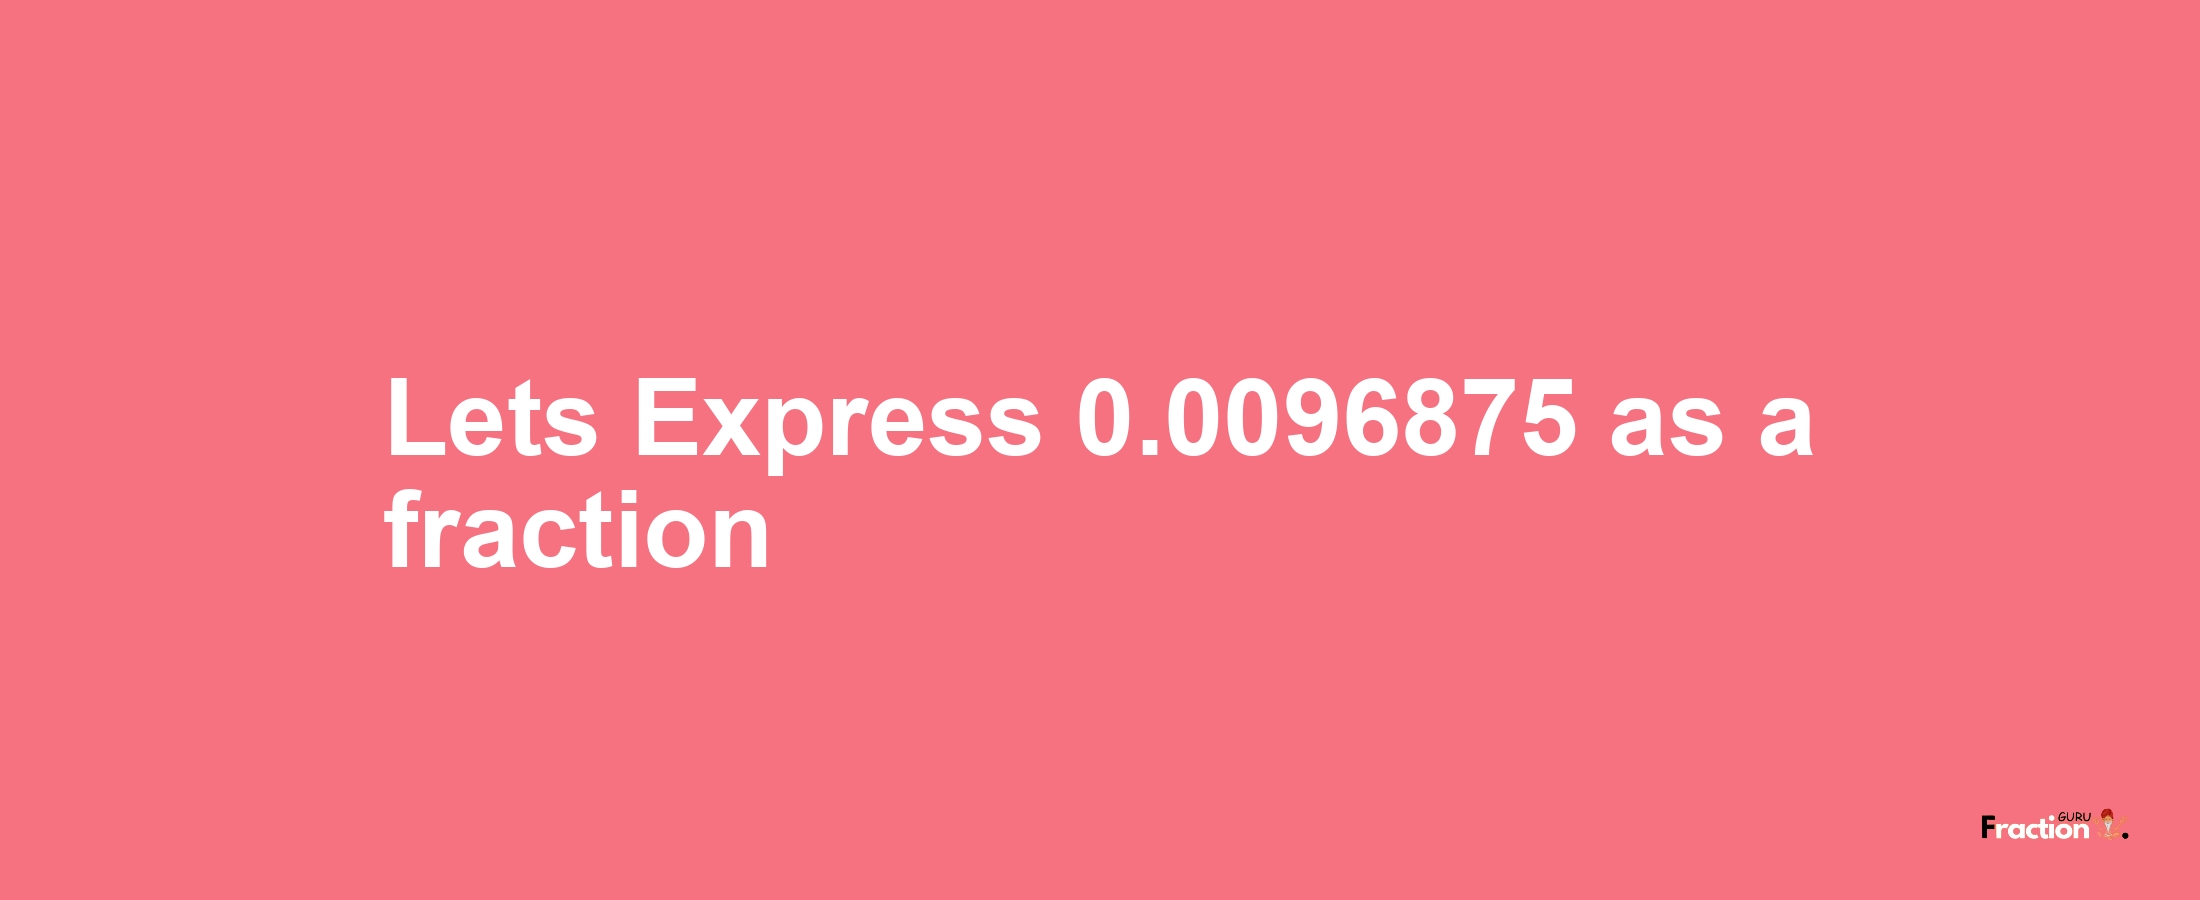 Lets Express 0.0096875 as afraction